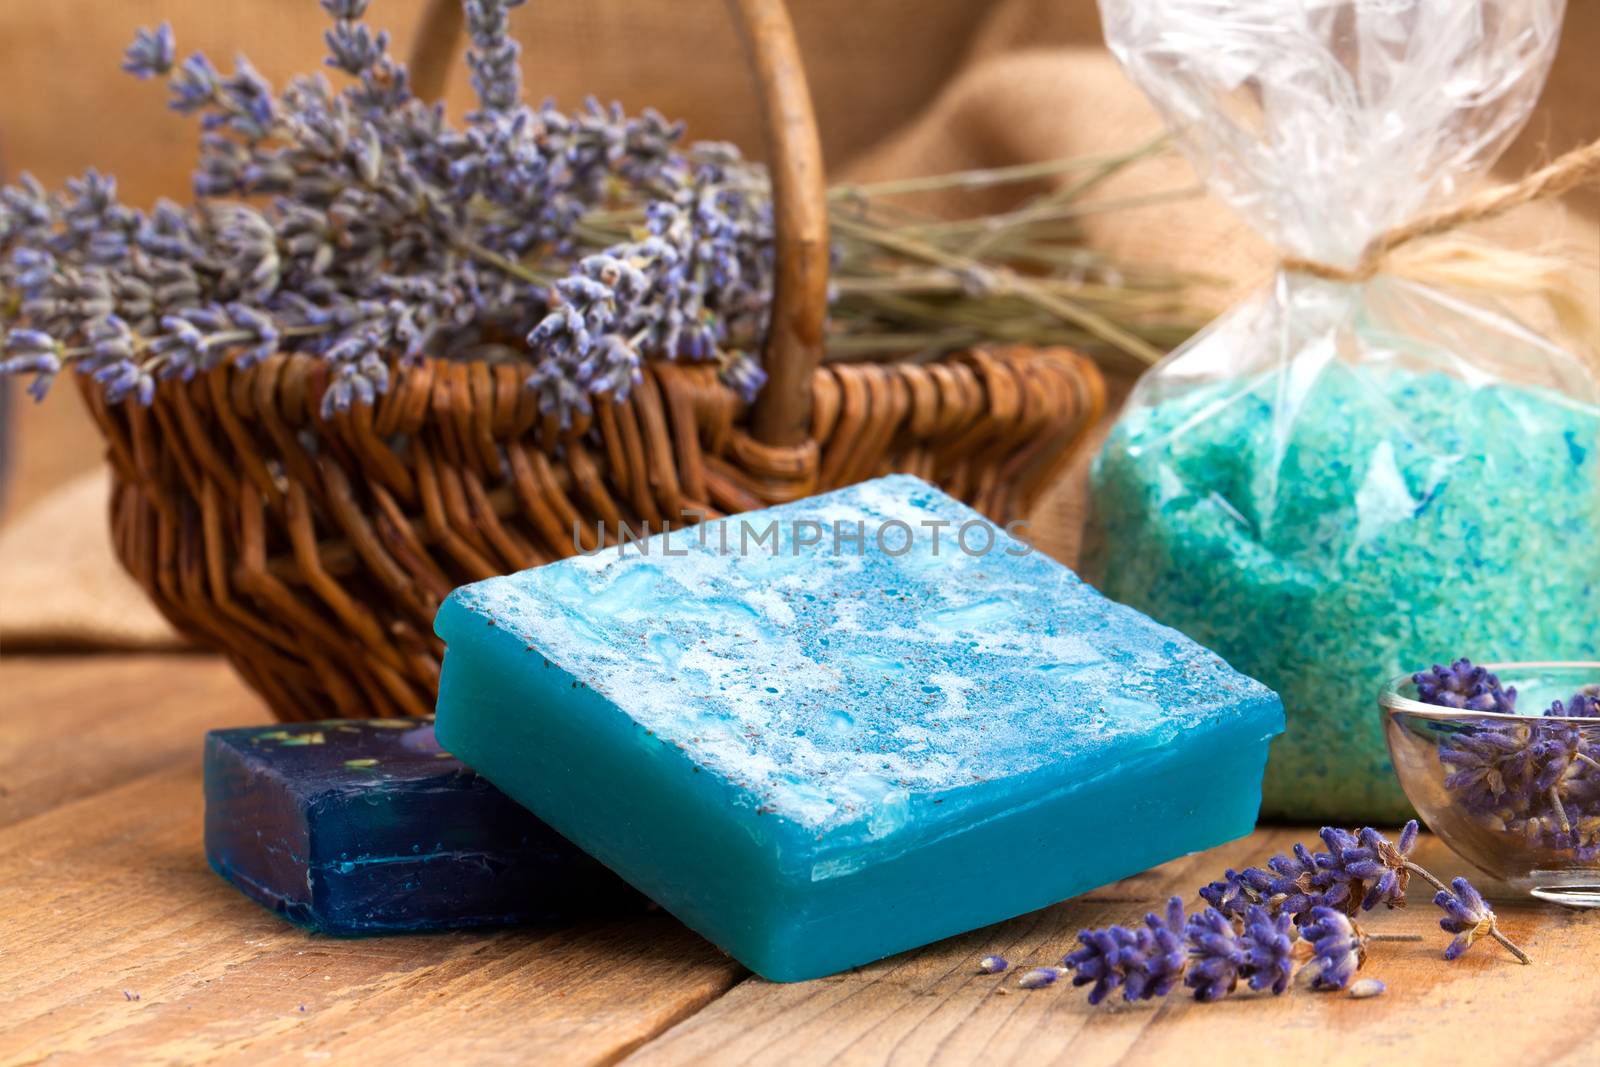 Homemade Soap with Lavender Flowers and Sea Salt